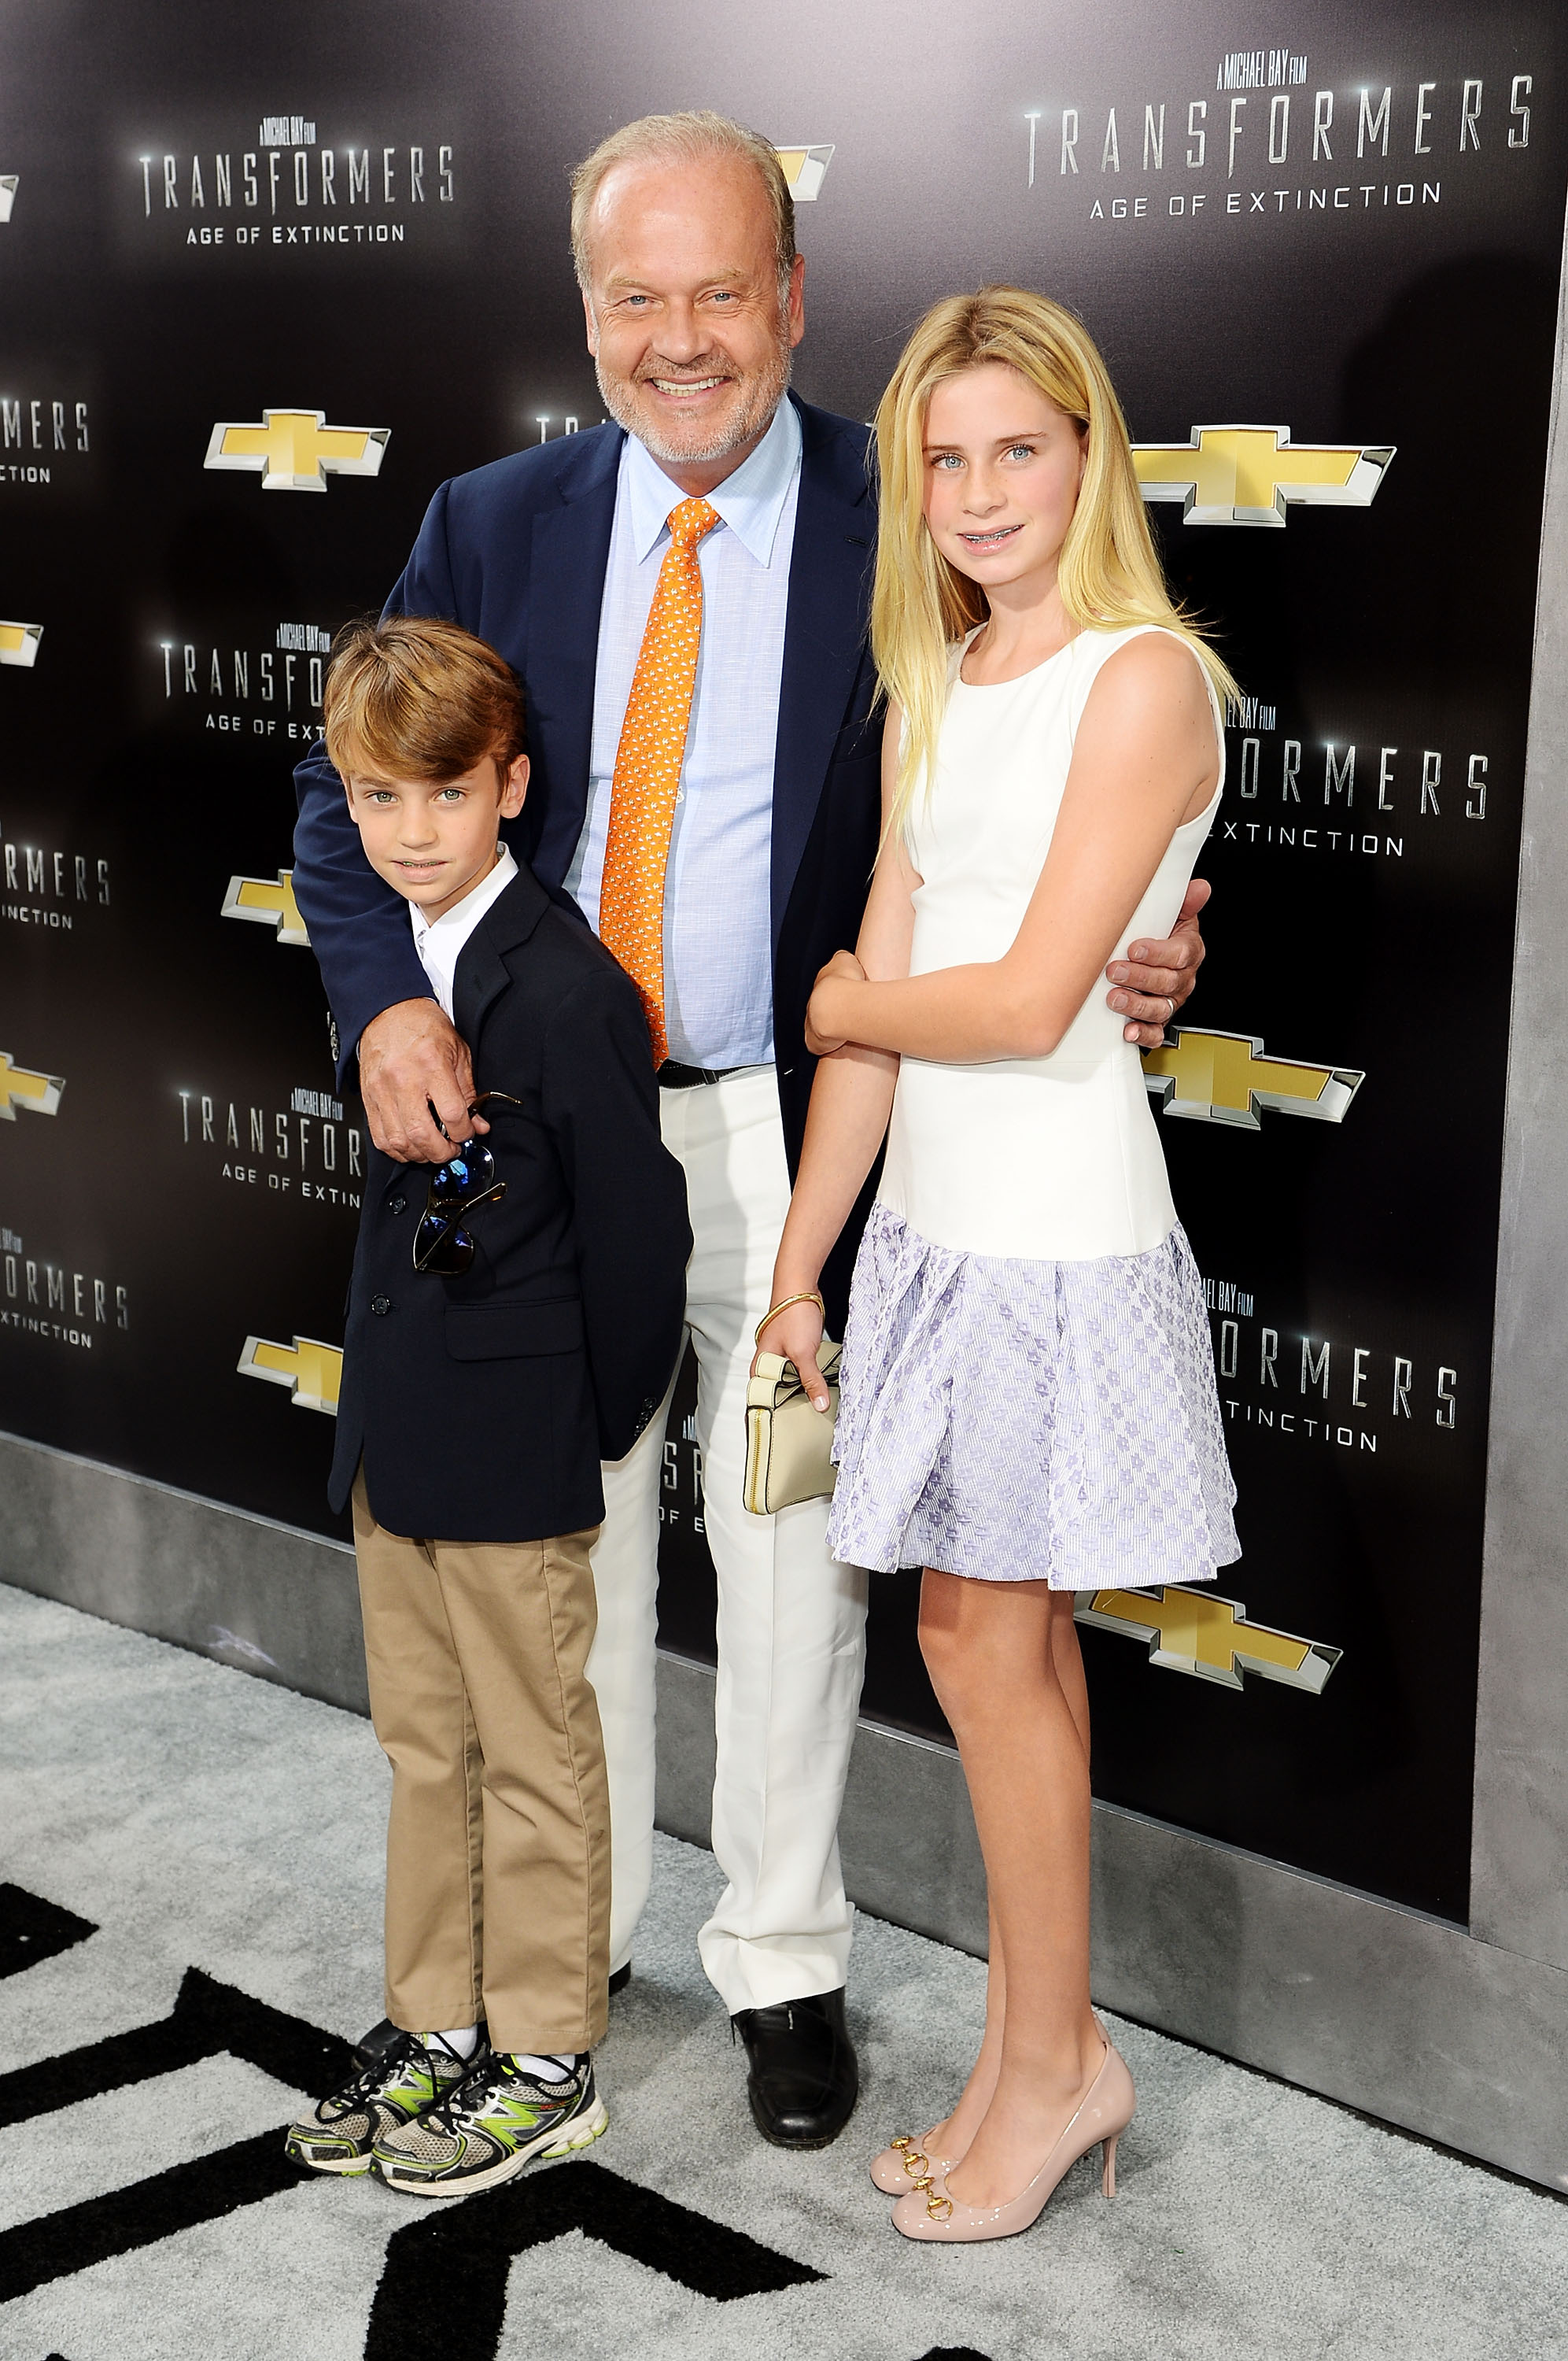 Kelsey Grammer with his children Mason and Jude Grammer at the New York Premiere of "Transformers: Age Of Extinction" on June 25, 2014 | Source: Getty Images